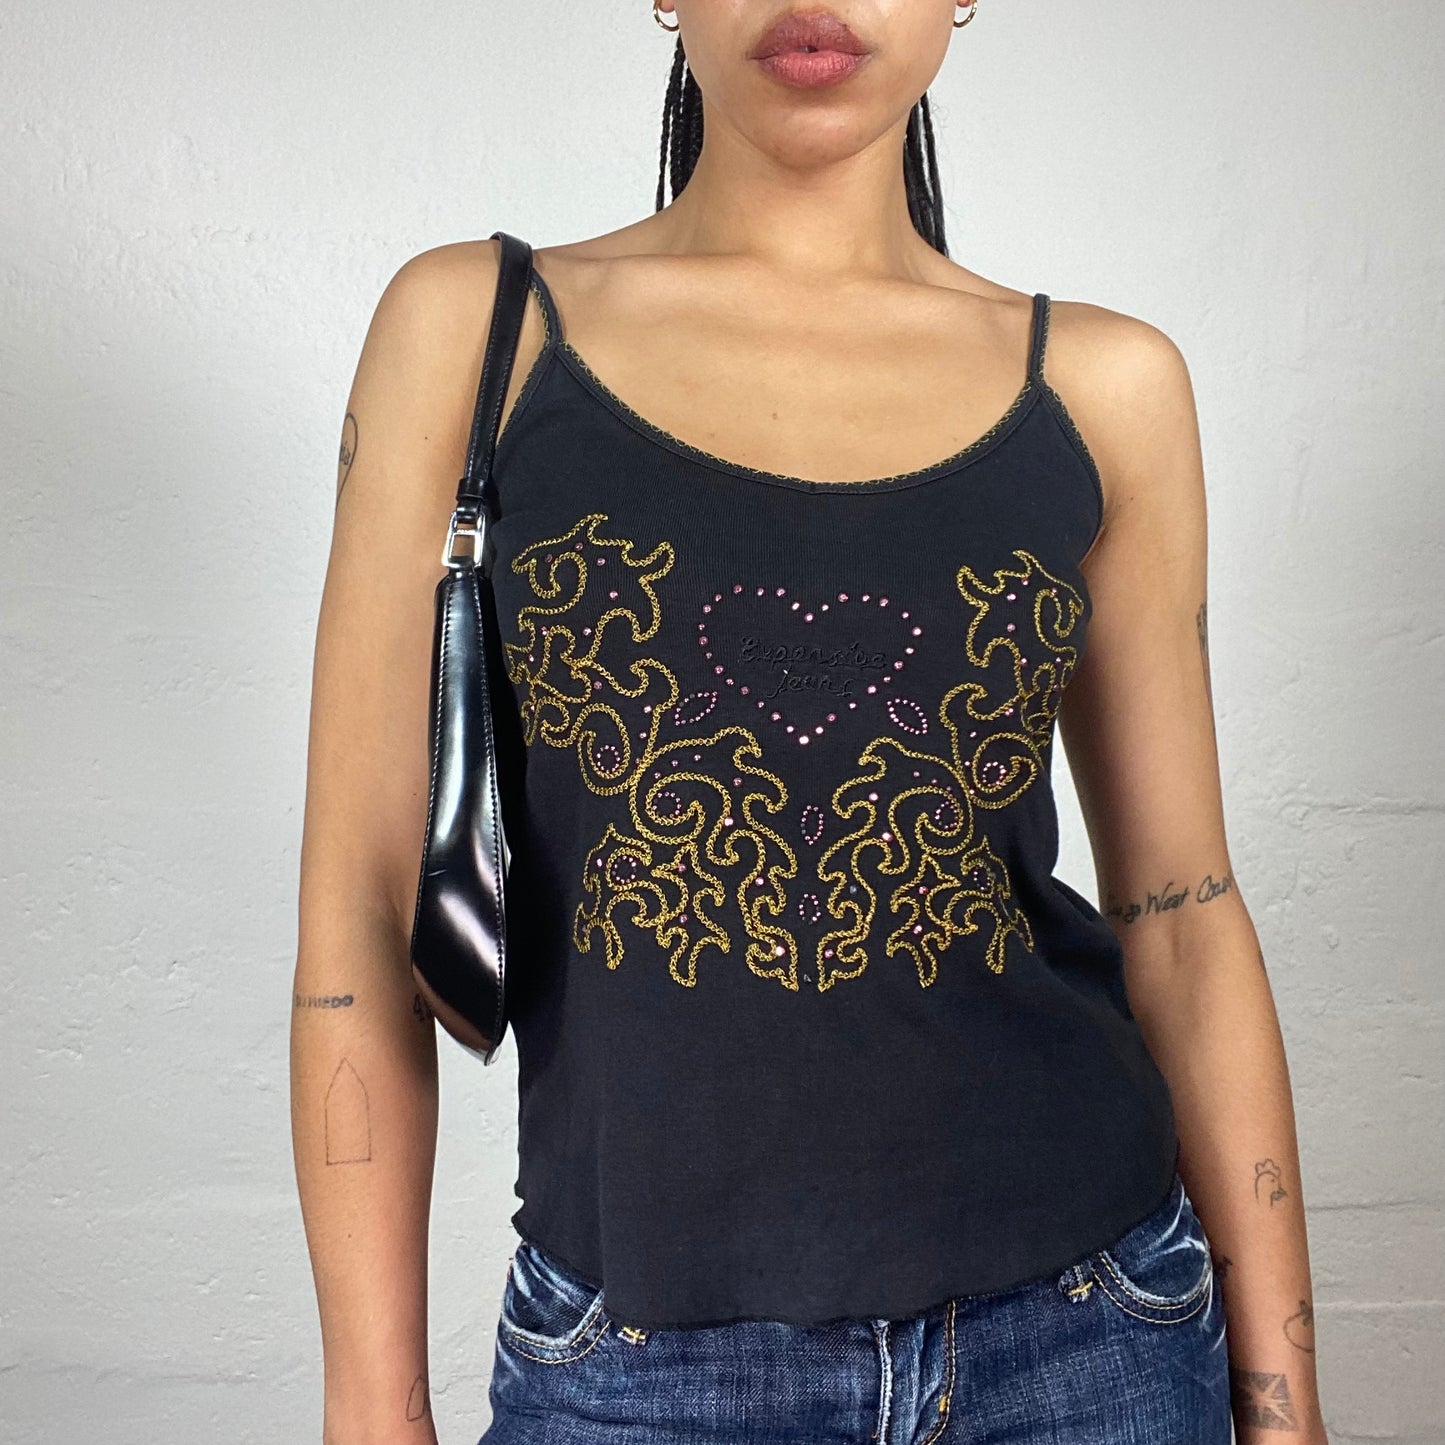 Vintage 2000's Downtown Girl Black Cami Top with Gold Abstract Print and Pink Rhinestone Heart Embroidery (L)